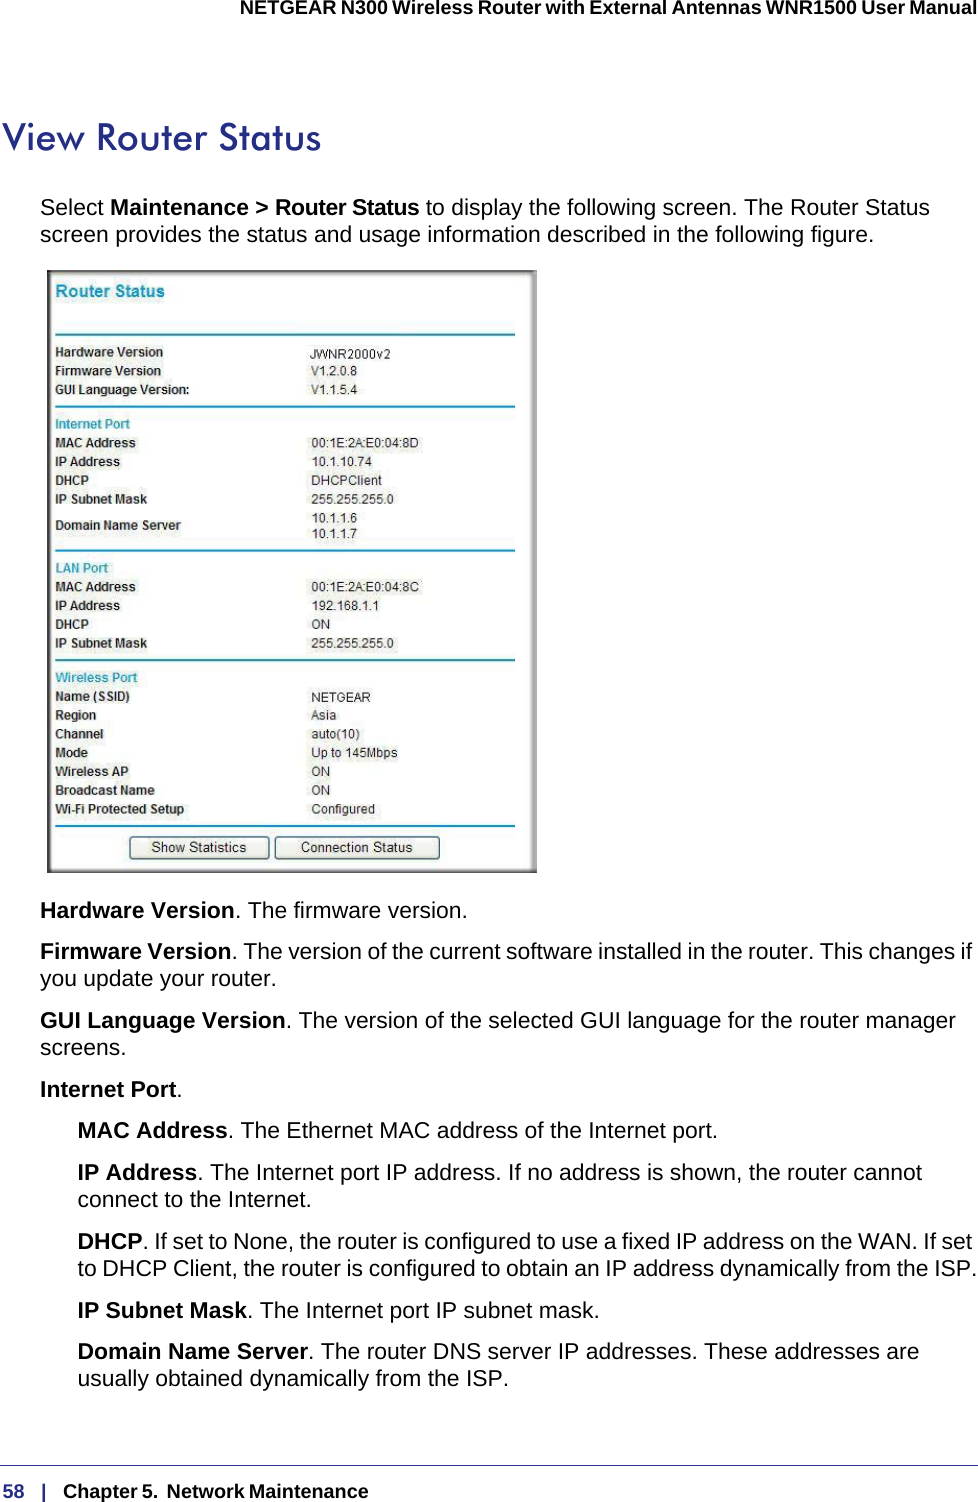 58   |   Chapter 5.  Network Maintenance  NETGEAR N300 Wireless Router with External Antennas WNR1500 User Manual View Router StatusSelect Maintenance &gt; Router Status to display the following screen. The Router Status screen provides the status and usage information described in the following figure.Hardware Version. The firmware version.Firmware Version. The version of the current software installed in the router. This changes if you update your router.GUI Language Version. The version of the selected GUI language for the router manager screens. Internet Port.MAC Address. The Ethernet MAC address of the Internet port.IP Address. The Internet port IP address. If no address is shown, the router cannot connect to the Internet.DHCP. If set to None, the router is configured to use a fixed IP address on the WAN. If set to DHCP Client, the router is configured to obtain an IP address dynamically from the ISP.IP Subnet Mask. The Internet port IP subnet mask.Domain Name Server. The router DNS server IP addresses. These addresses are usually obtained dynamically from the ISP.